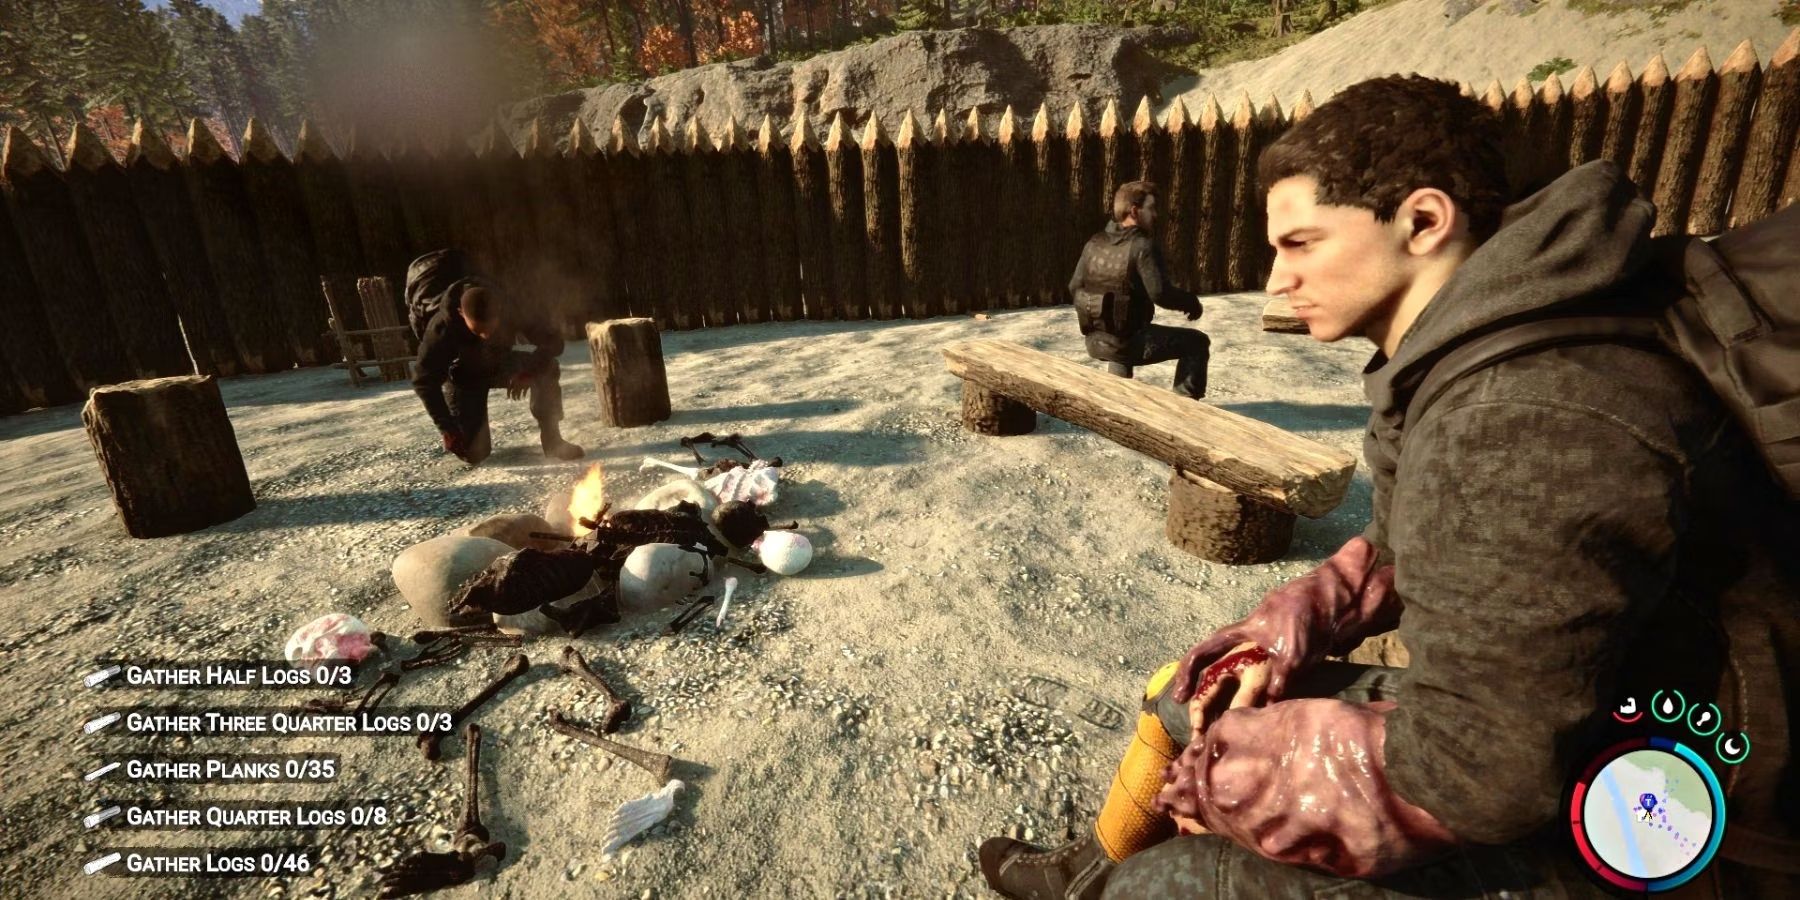 Three Sons of the Forest players sit on sand with scattered skeletons burning in a bonfire